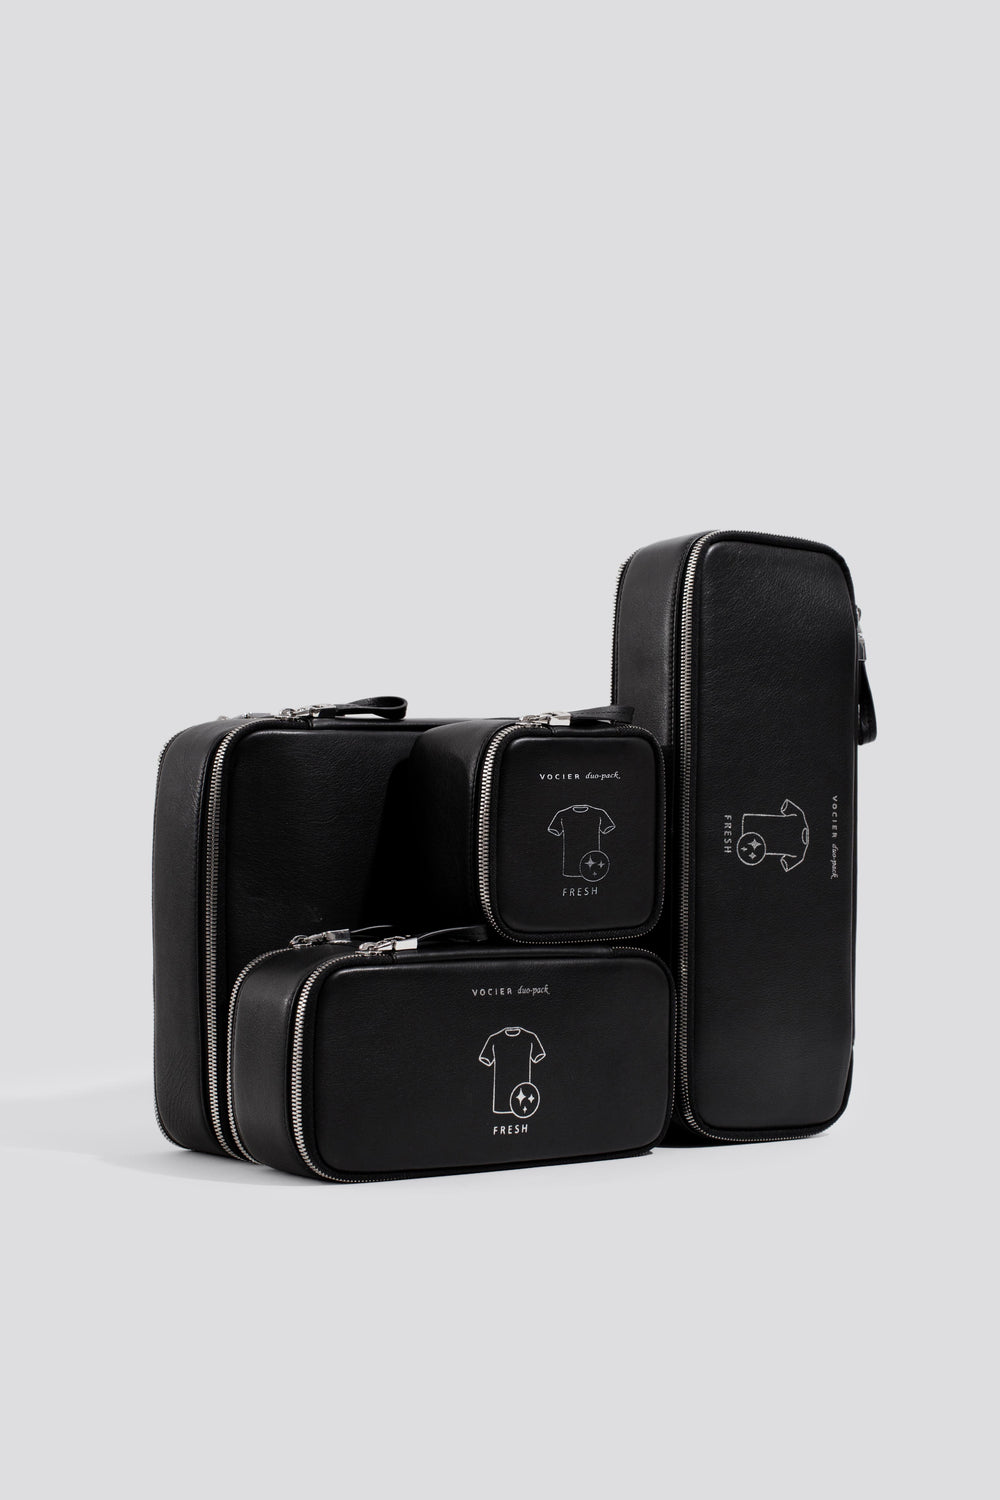 duo pack set black leather